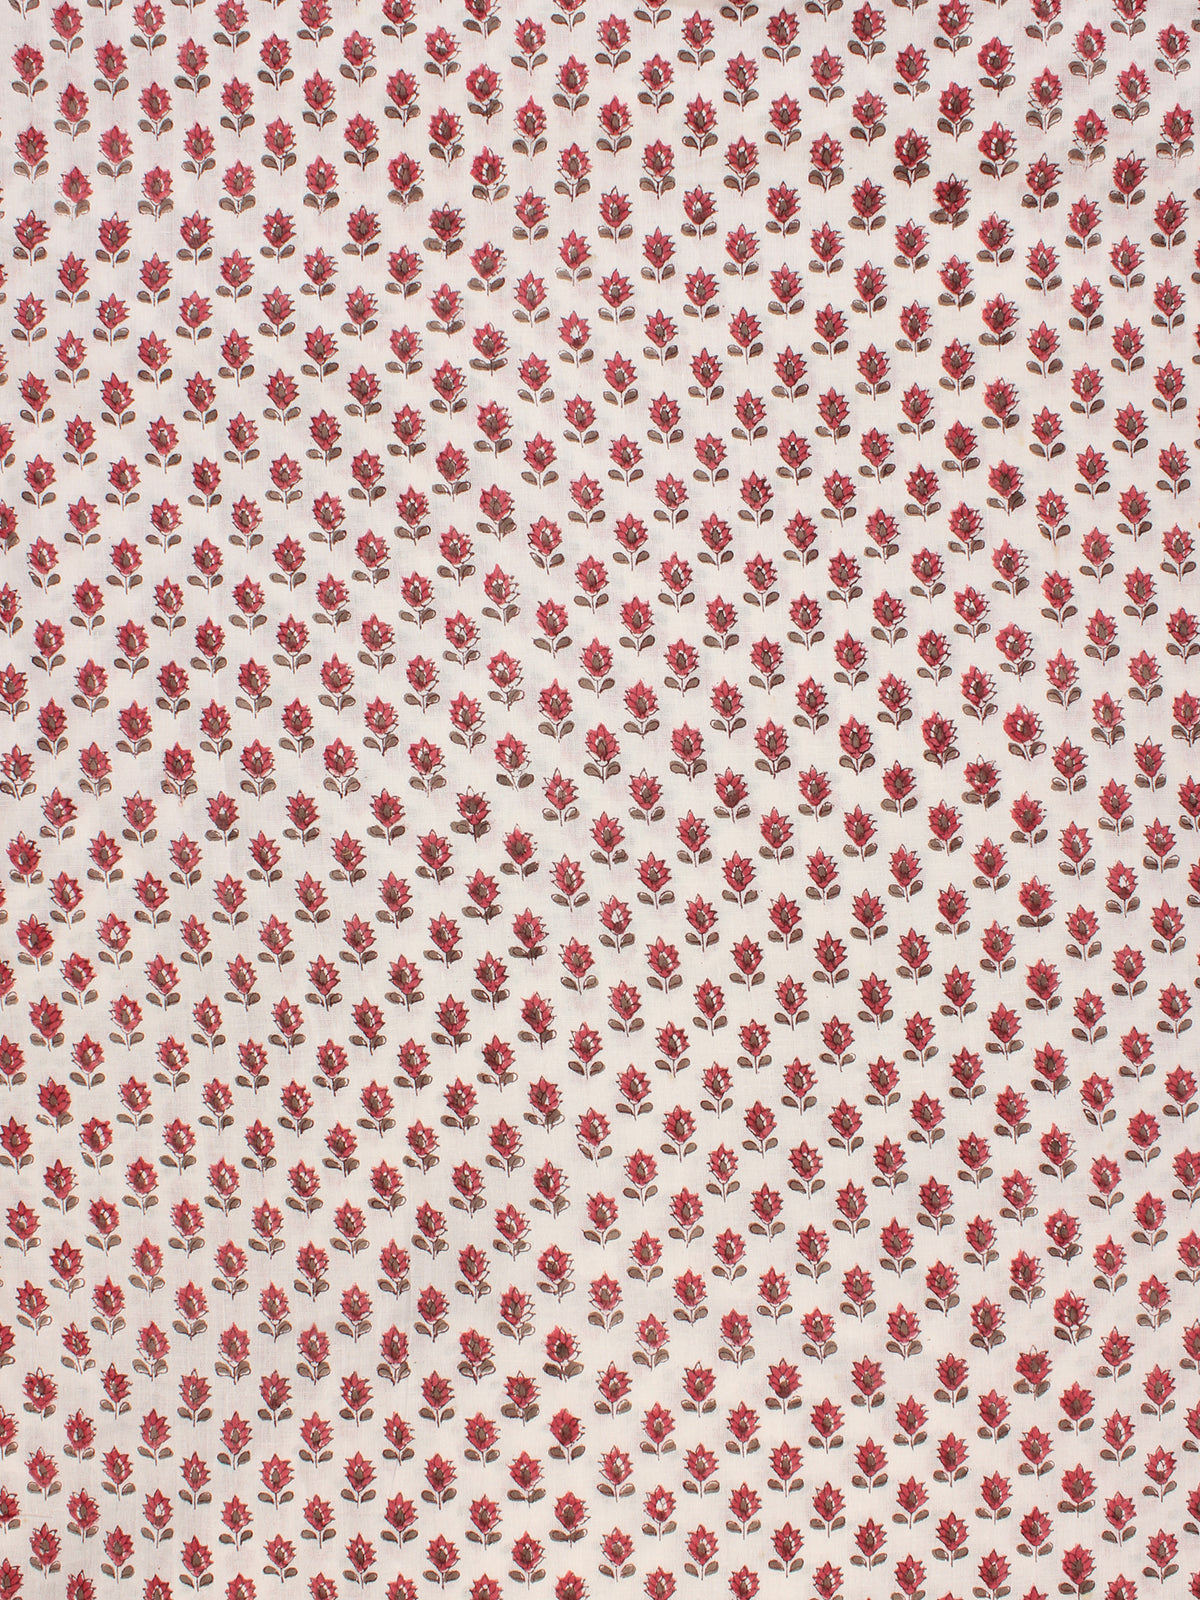 White Red Pink Hand Block Printed Cotton Fabric Per Meter - F001F2349